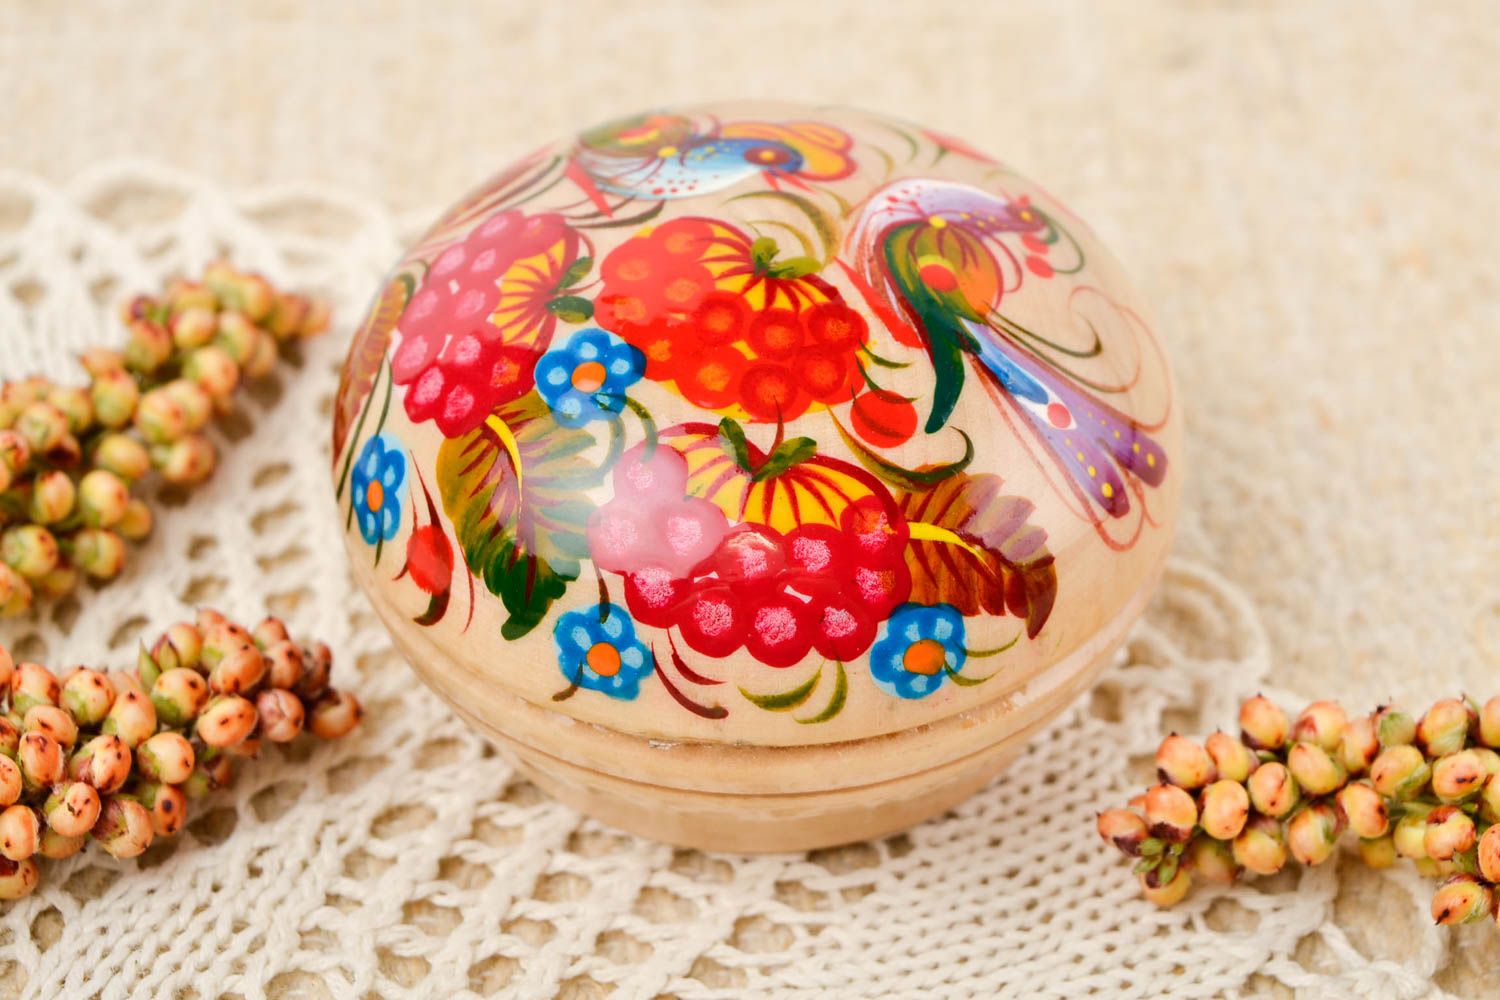 Handmade wooden jewellery box jewelry boxes for women wood decor unique gifts photo 1